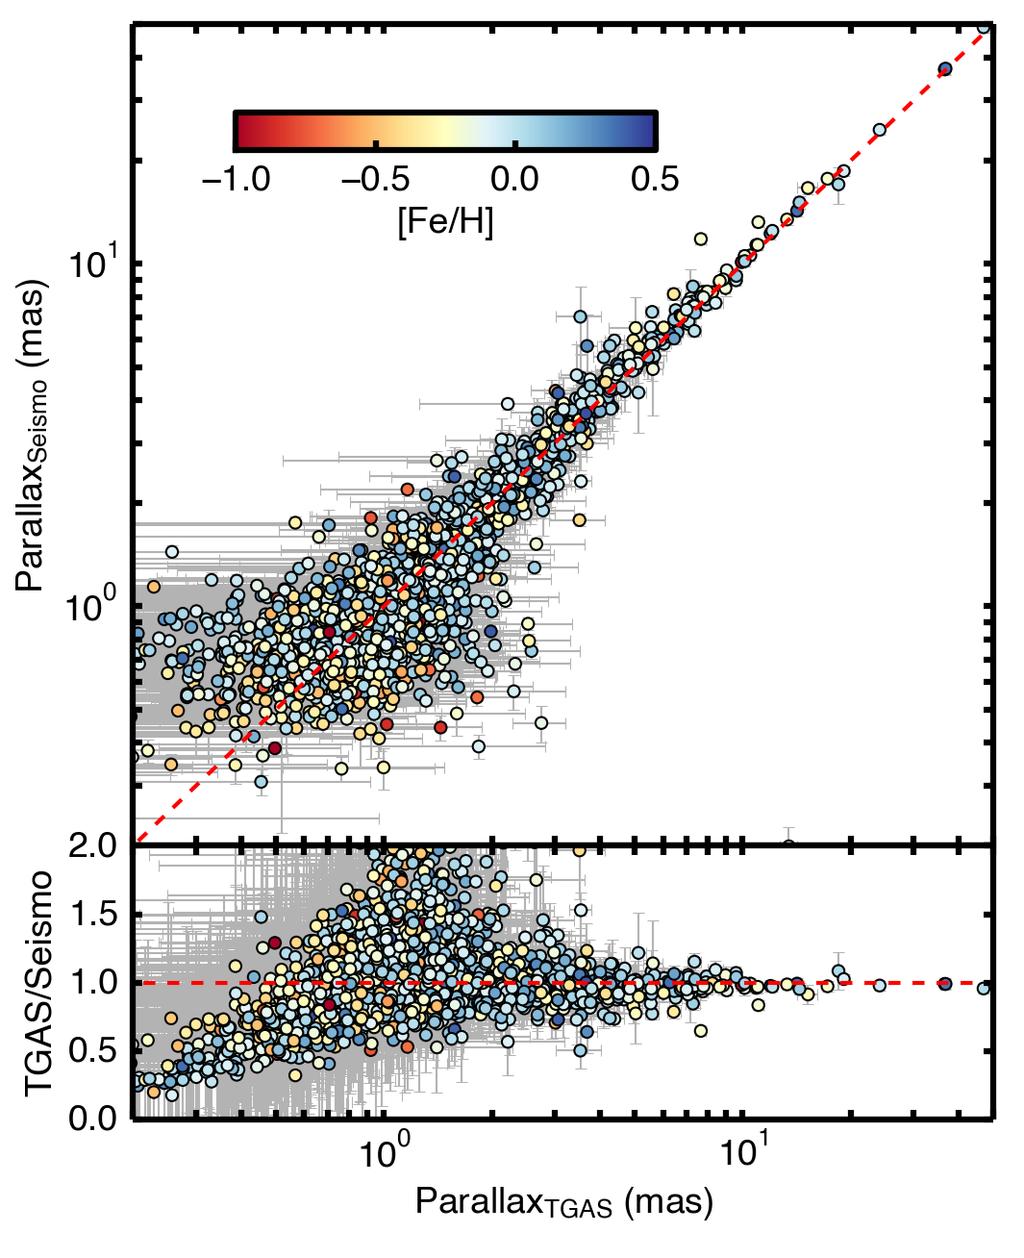 6 Daniel Huber et al. Fig. 4. Asteroseismic parallaxes (calculated using the direct method without ν correction) versus TGAS parallaxes for all 2200 stars in our sample.